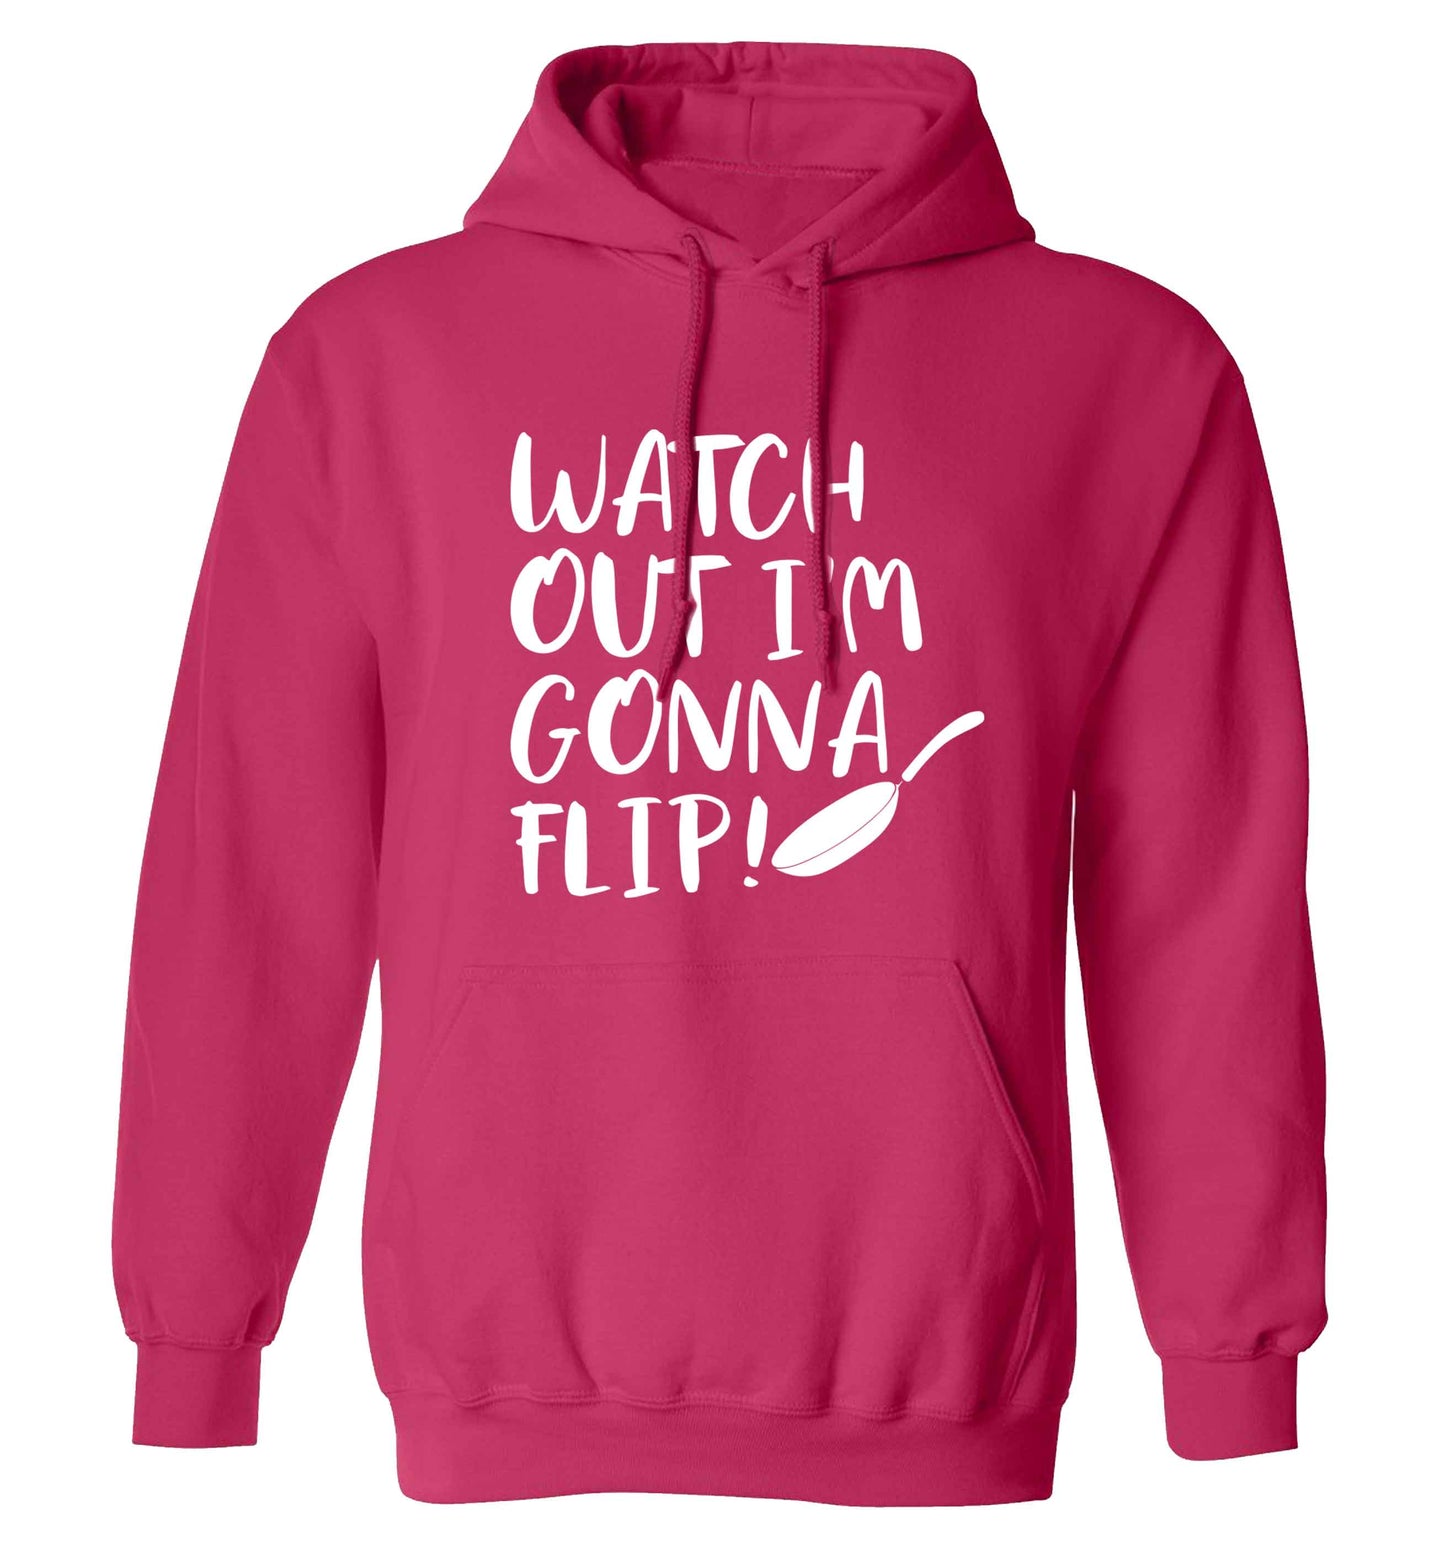 Watch out I'm gonna flip! adults unisex pink hoodie 2XL